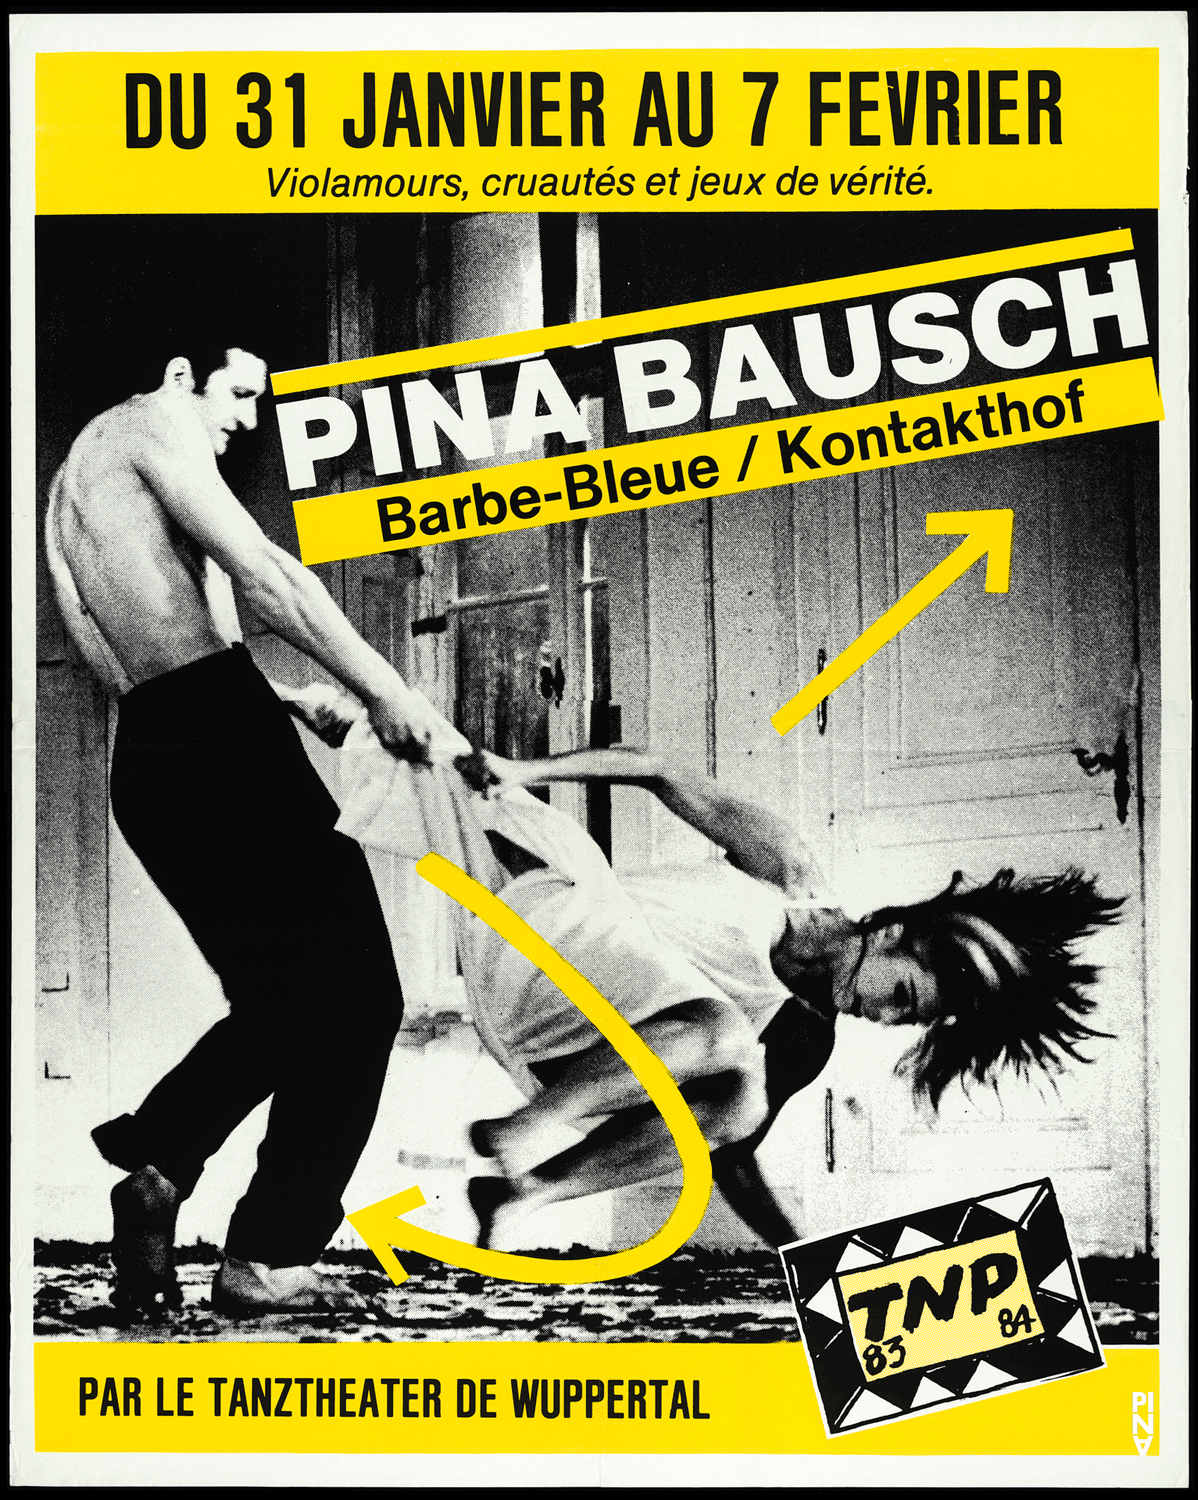 Poster for “Bluebeard. While Listening to a Tape Recording of Béla Bartók's Opera "Duke Bluebeard's Castle"” and “Kontakthof” by Pina Bausch in Lyon, 01/31/1984 – 02/07/1984